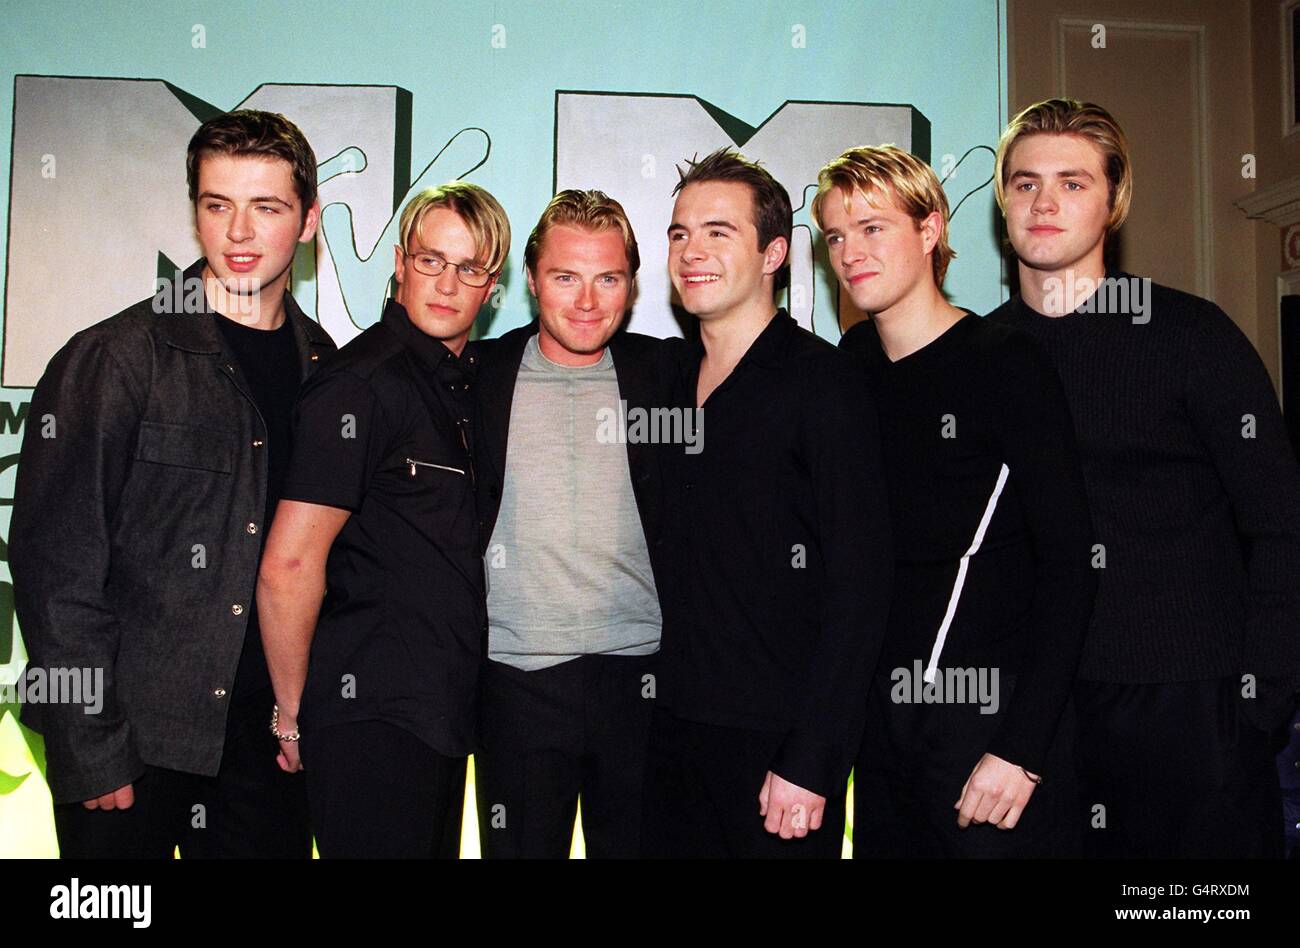 Pop boy band Westlife, with Ronan Keating (3rd left), of Boyzone, arriving at the MTV Europe Music Awards nominations ceremony in London. L-R: Mark Feehily, Kian Egan, Ronan Keating, Shane Filan, Bryan McFadden and Nicky Byrne. Stock Photo